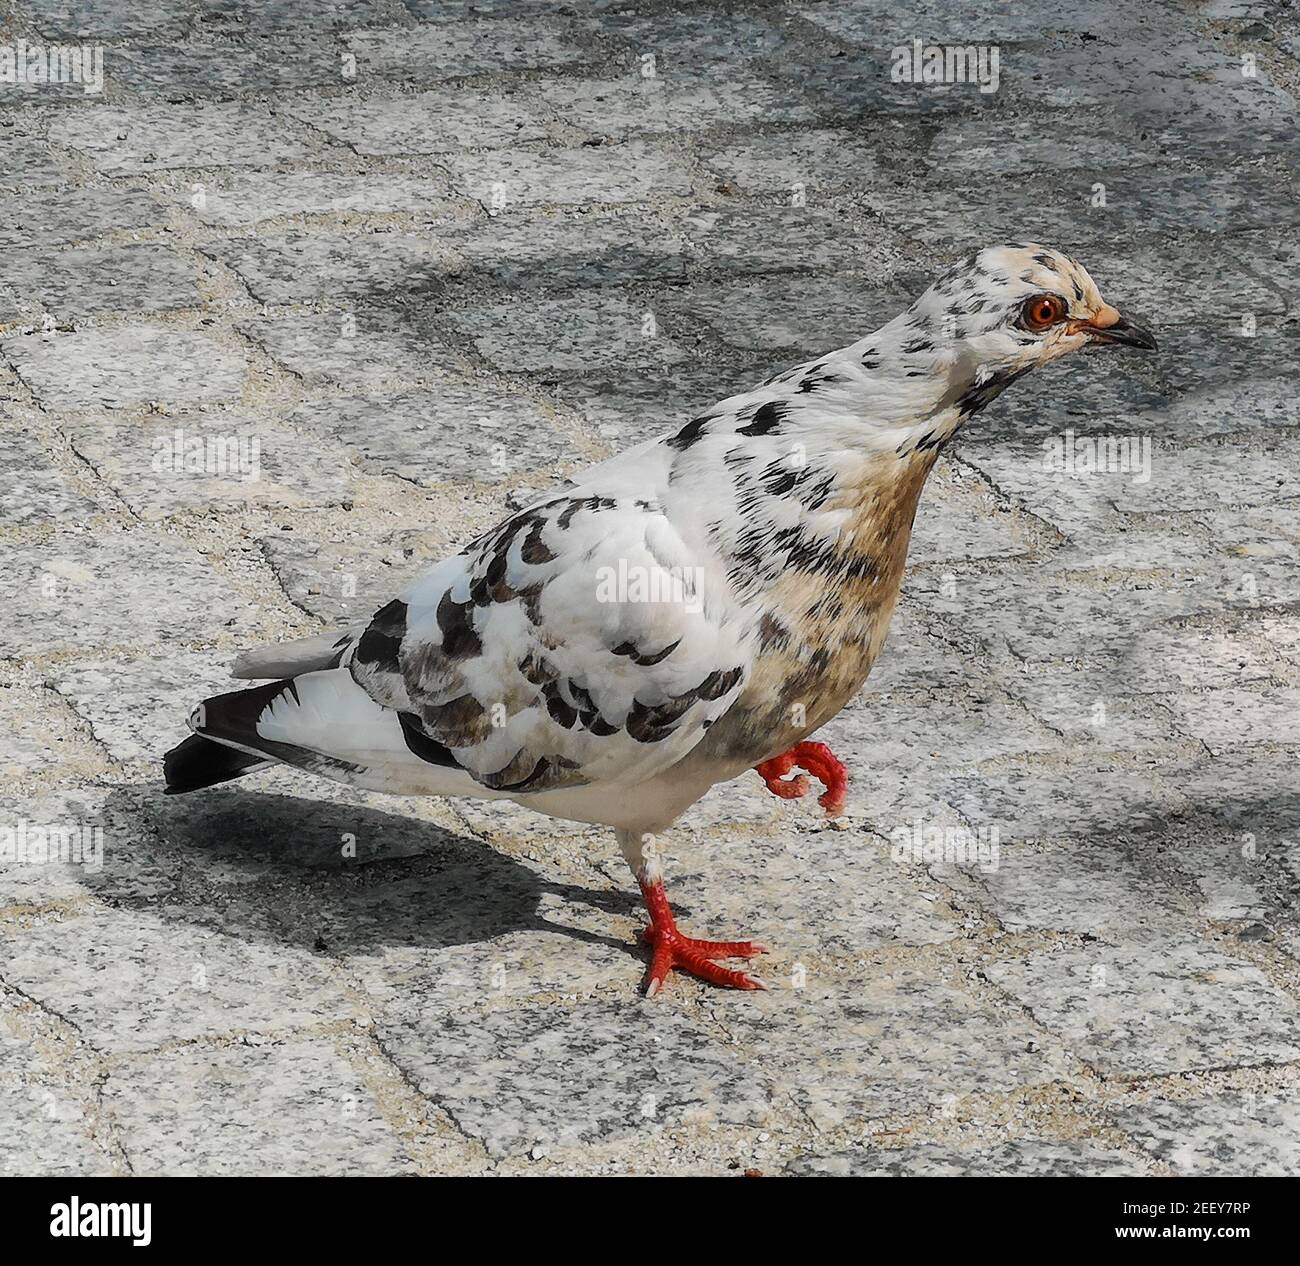 White pigeon with red eye walking on pavement in city center Stock Photo